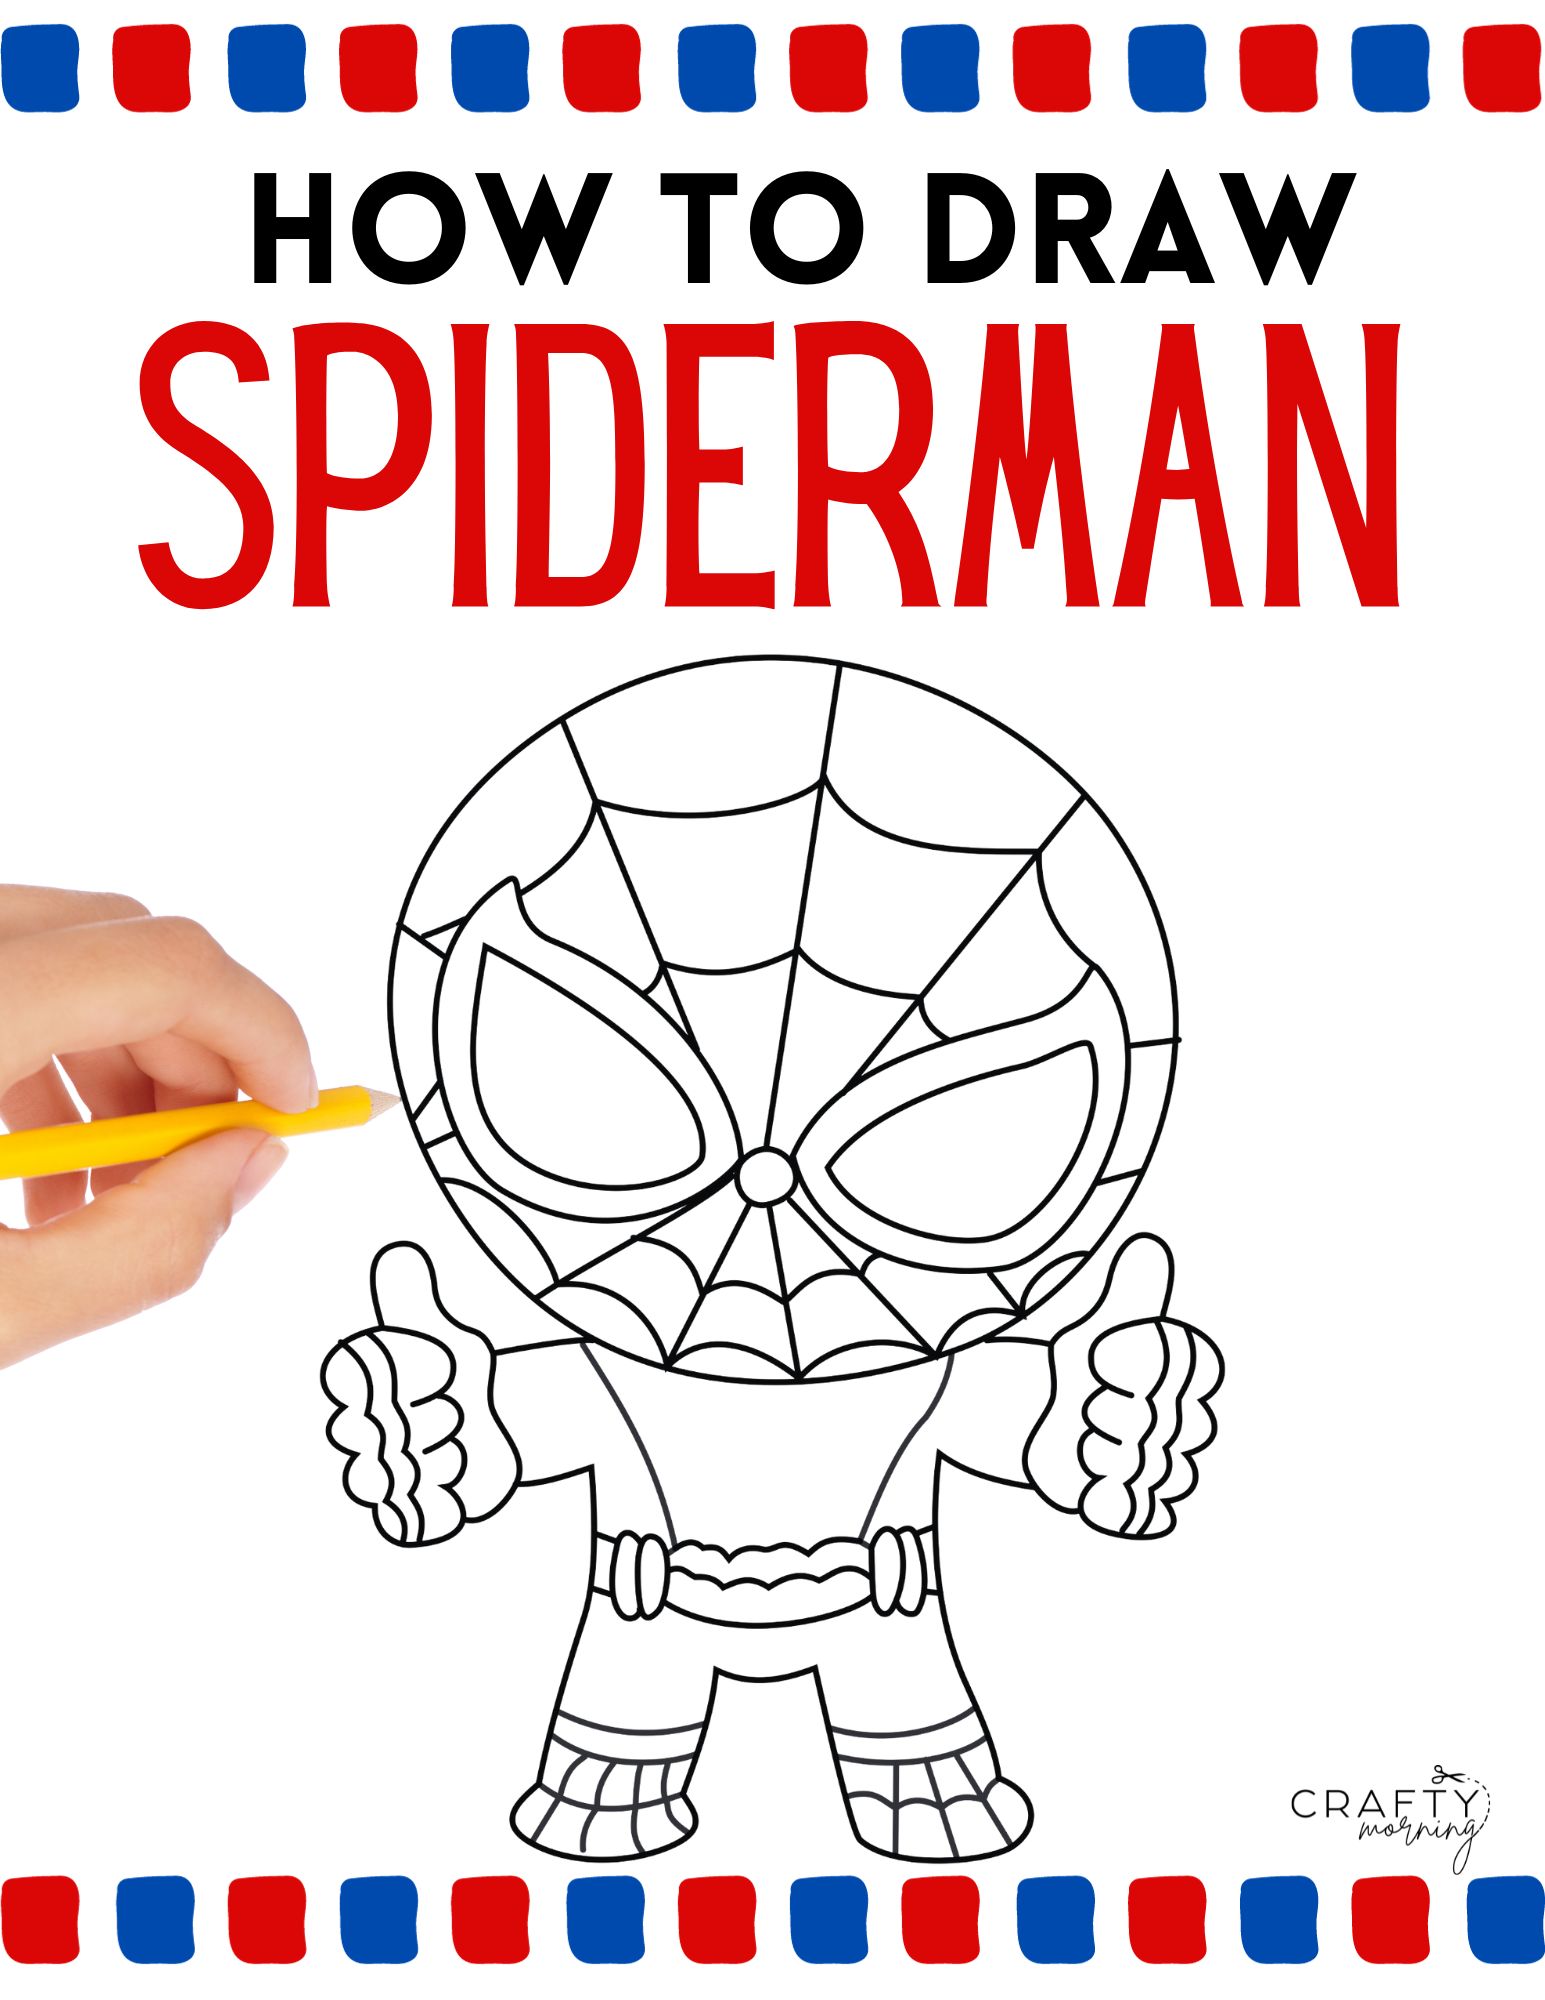 How to Draw Spiderman for Kids - Crafty Morning